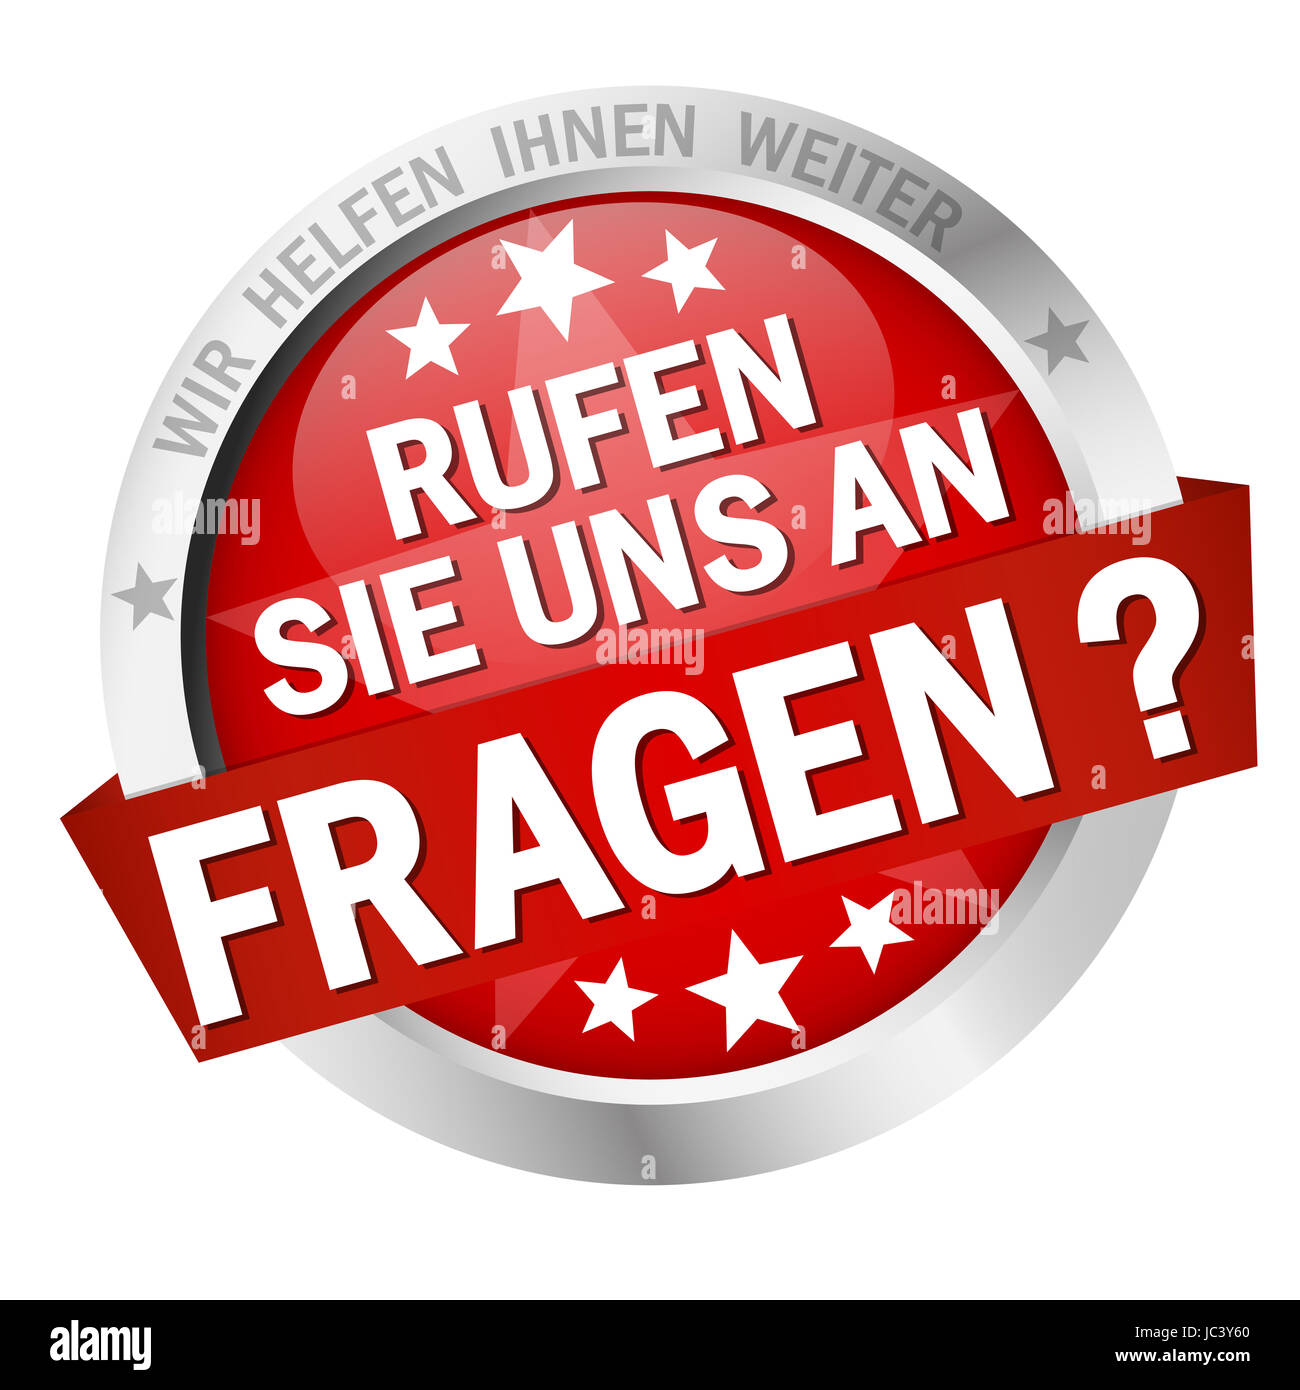 colored isolated button FRAGEN? - RUFEN SIE UNS AN Stock Photo